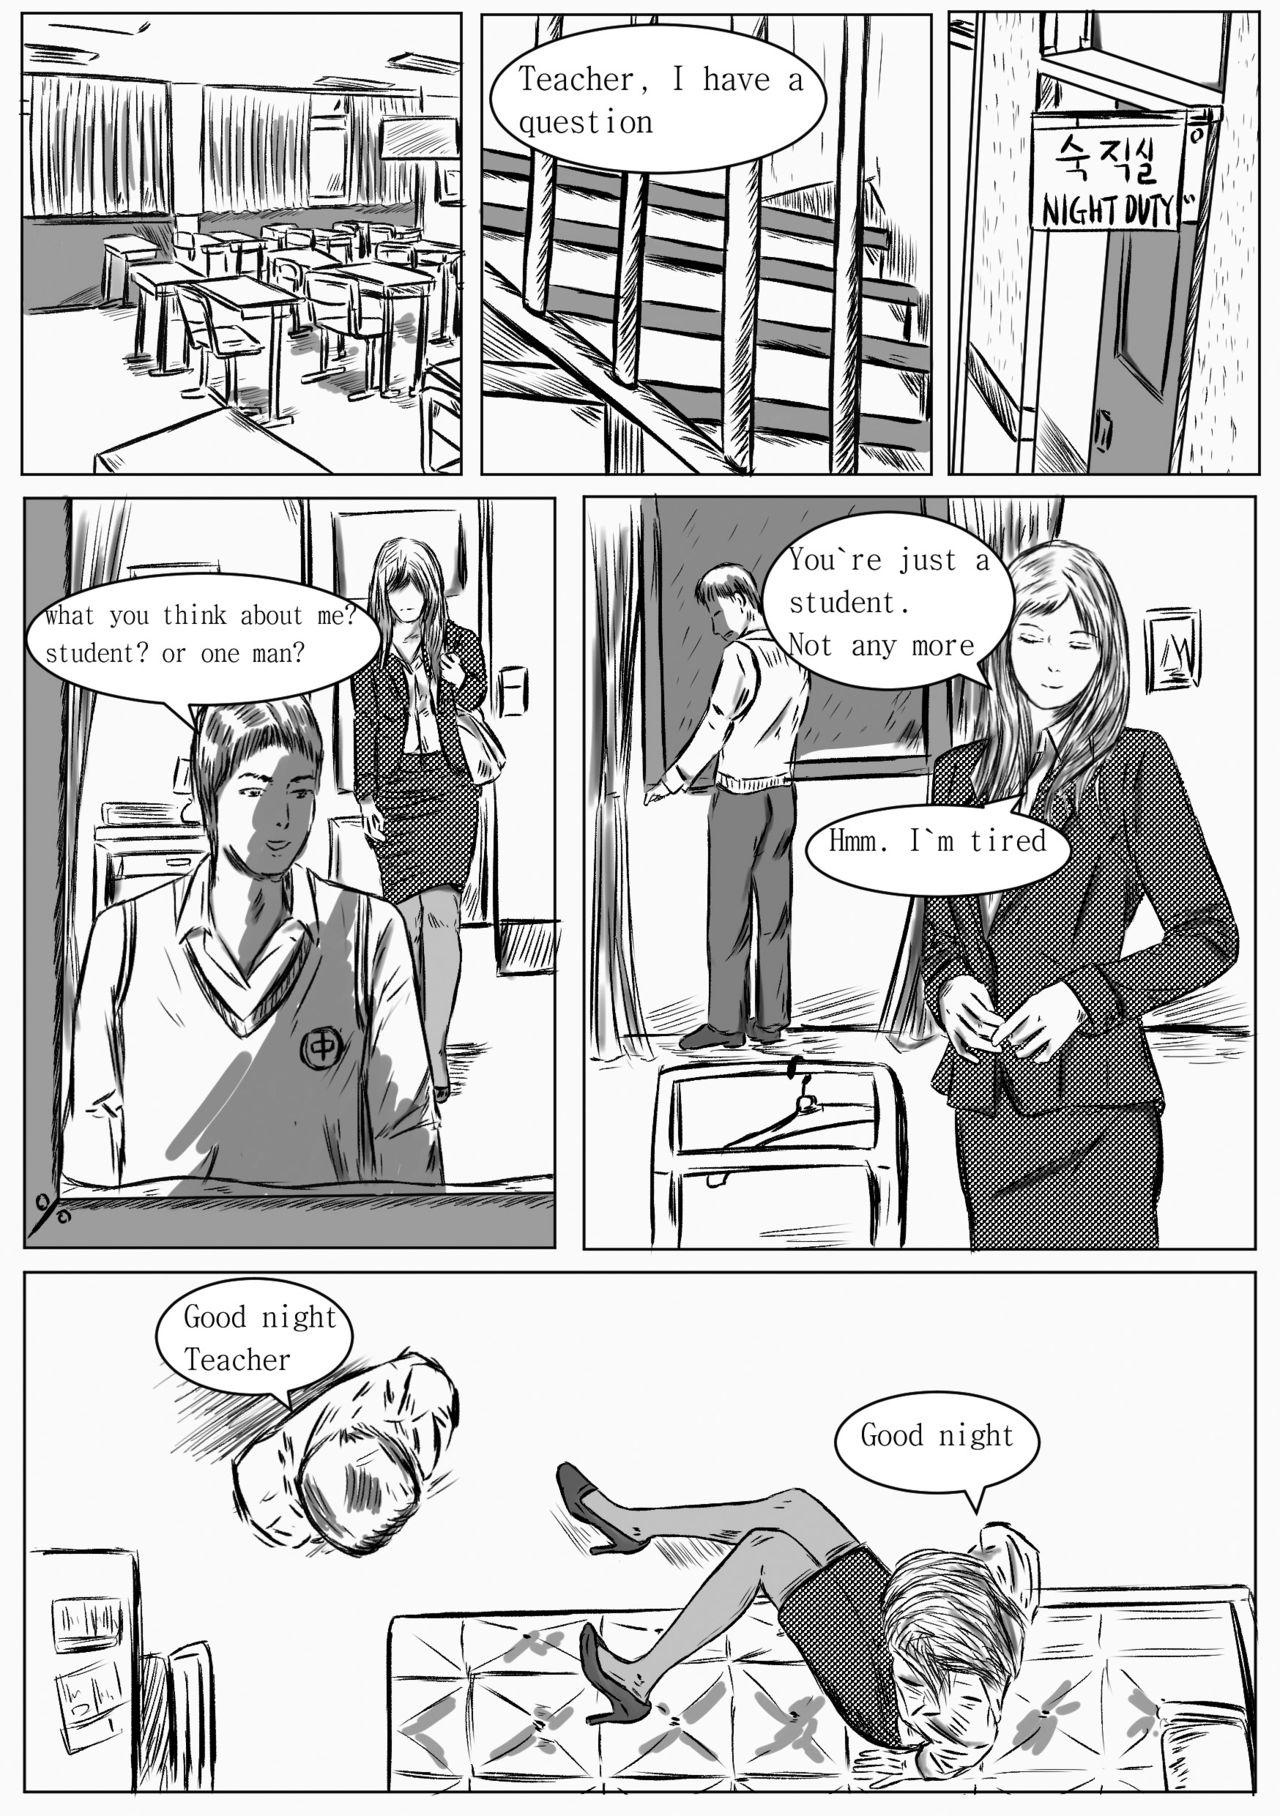 Adorable C. Teacher Is My OWN SLAVE! - Original Stepfamily - Page 6